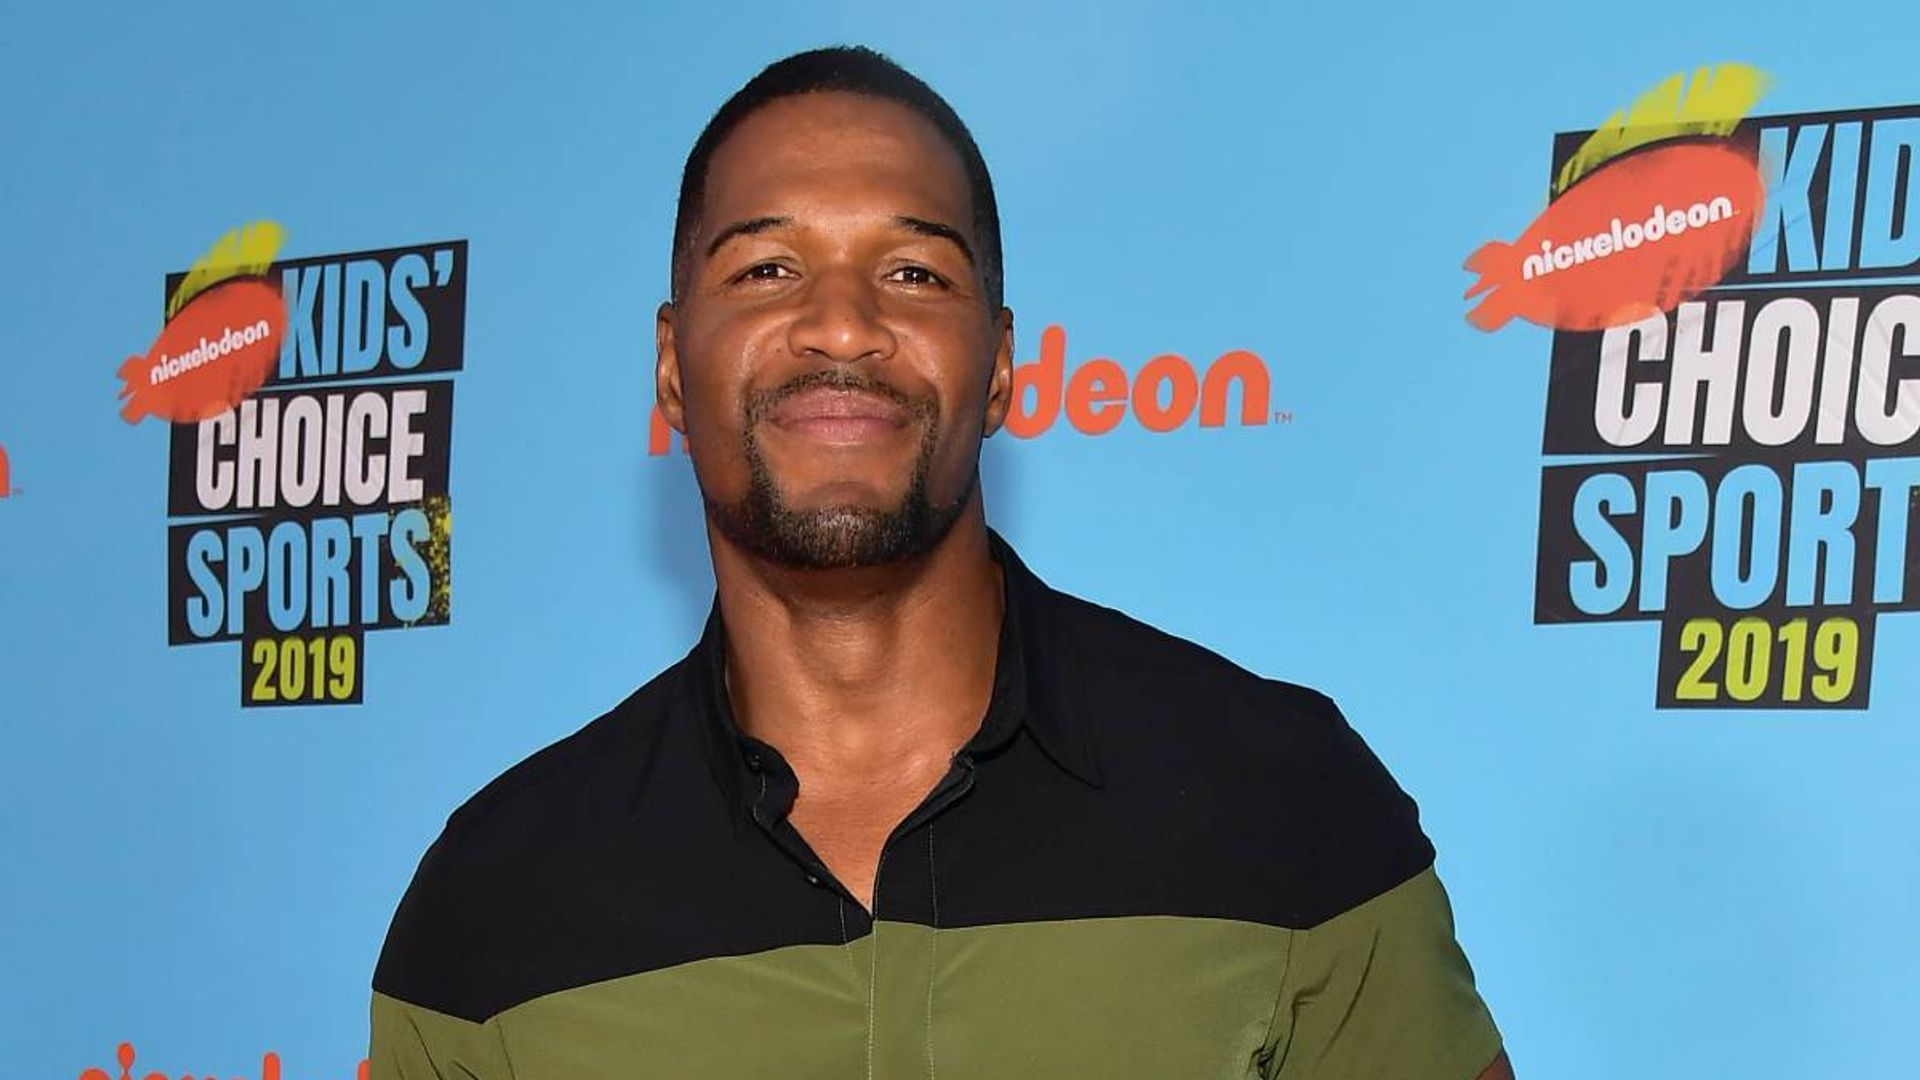 GMA' Fans React to Michael Strahan's Behind-the-Scenes Instagram